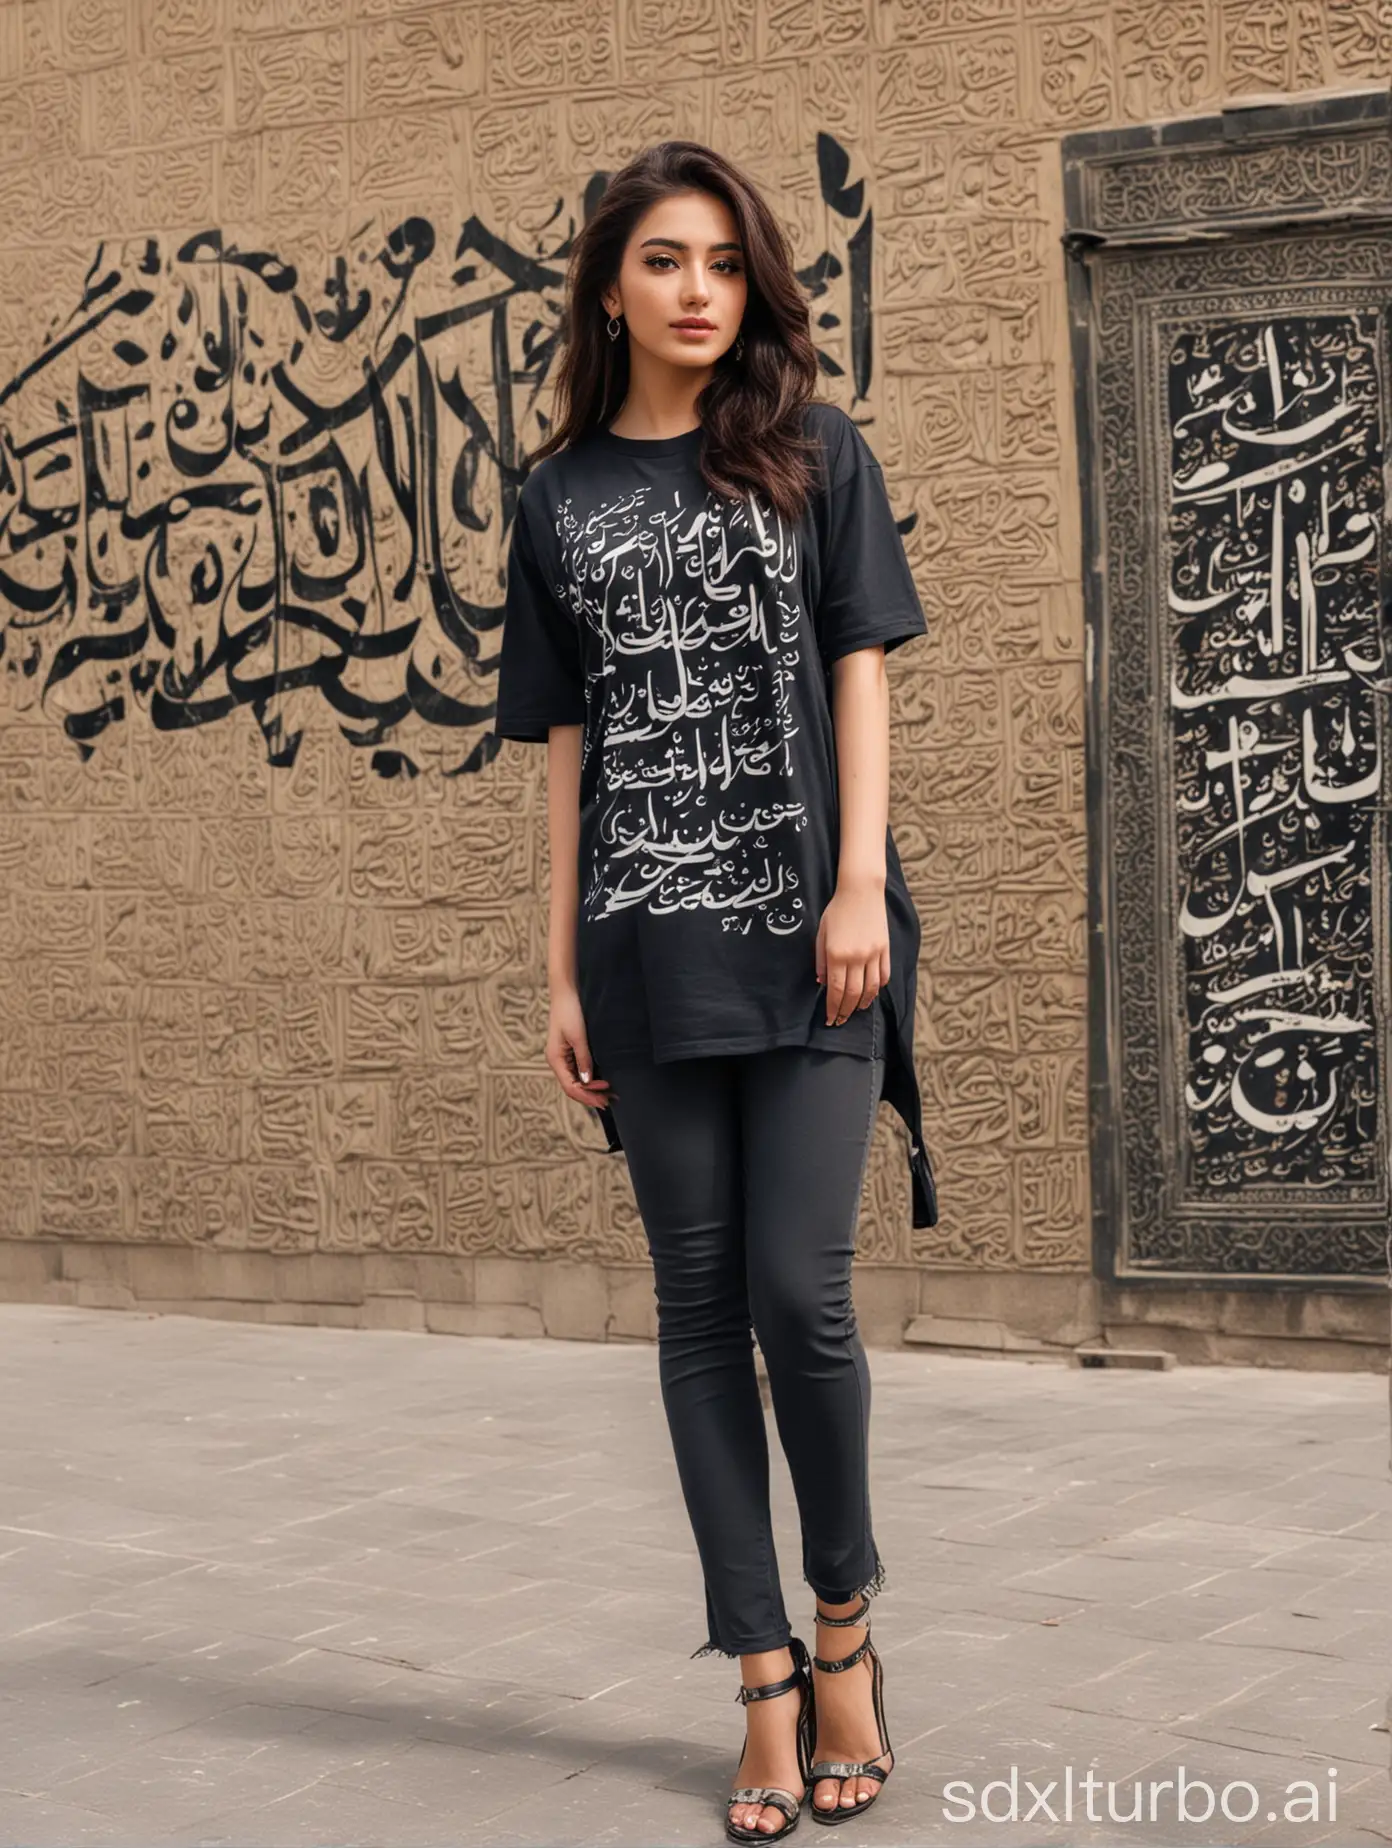 eastern girl fashion model  wear a Persian calligraphy over size t-shirt and pose for photoshot in Tehran streets